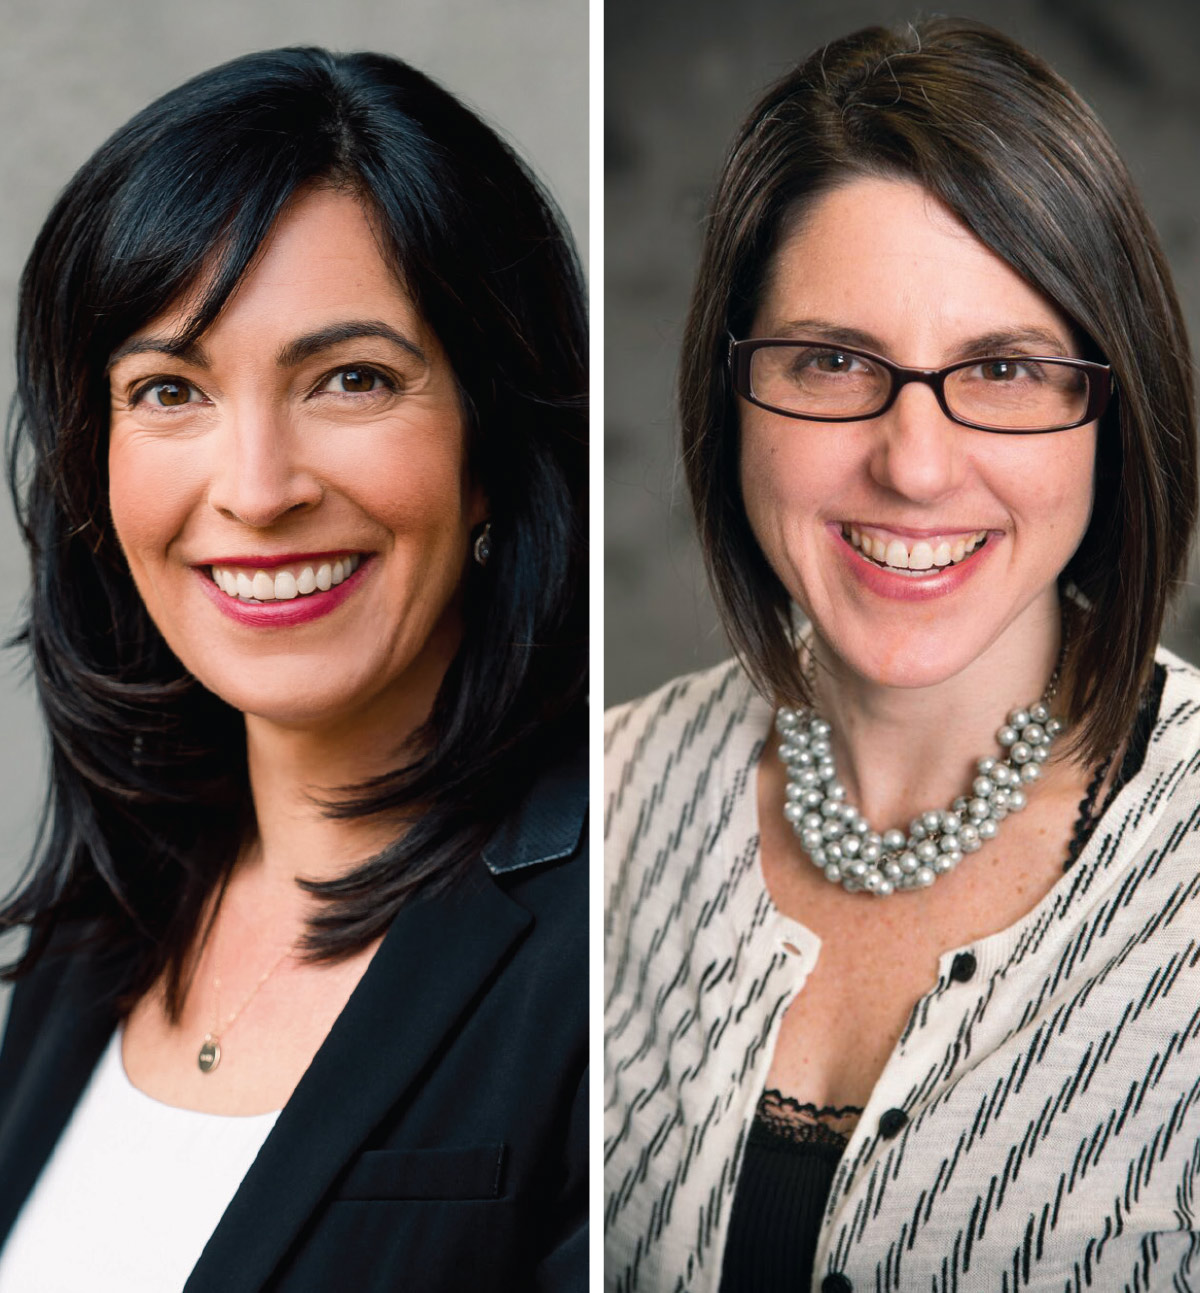 Co-founder and CEO Joanna Lydgate ’10 (left) and COO Jenn Fogel-Bublick ’98 headshots